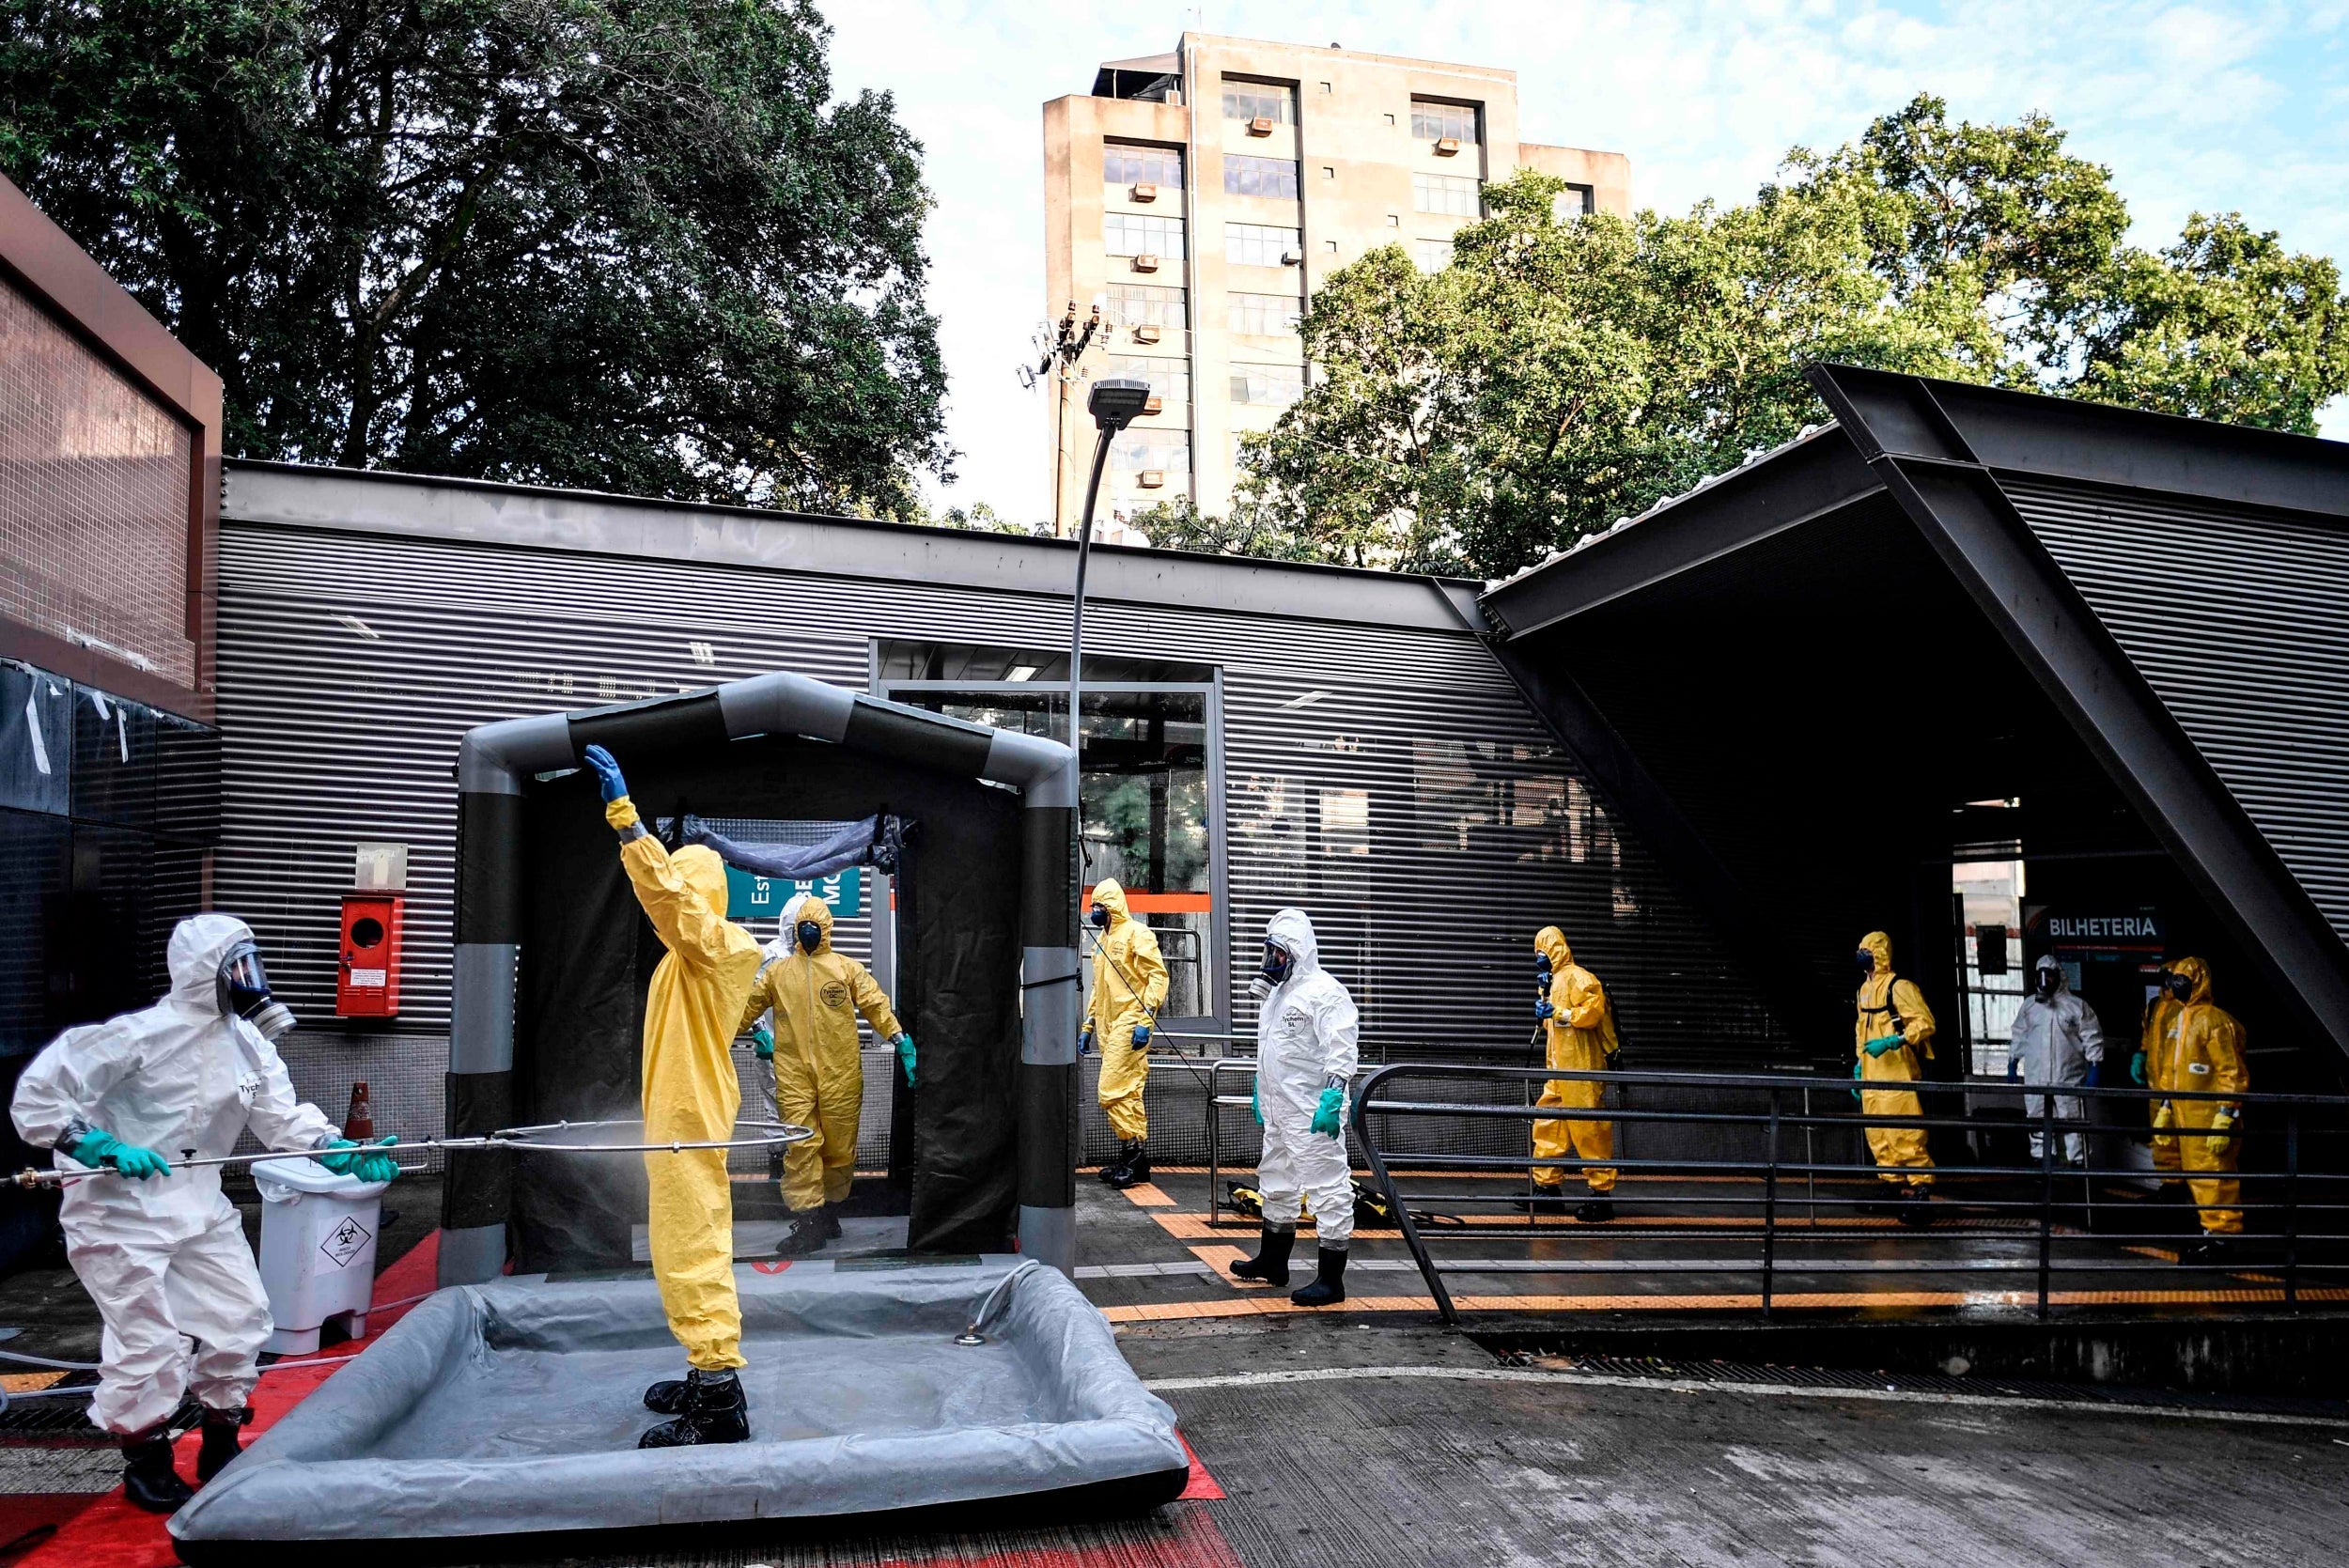 Brazil’s military, firefighters and civil defense members disinfect each other after cleaning in Belo Horizonte, Brazil, on April 9, 2020, to fight the spread of the novel coronavirus (Photo by DOUGLAS MAGNO/AFP via Getty Images)